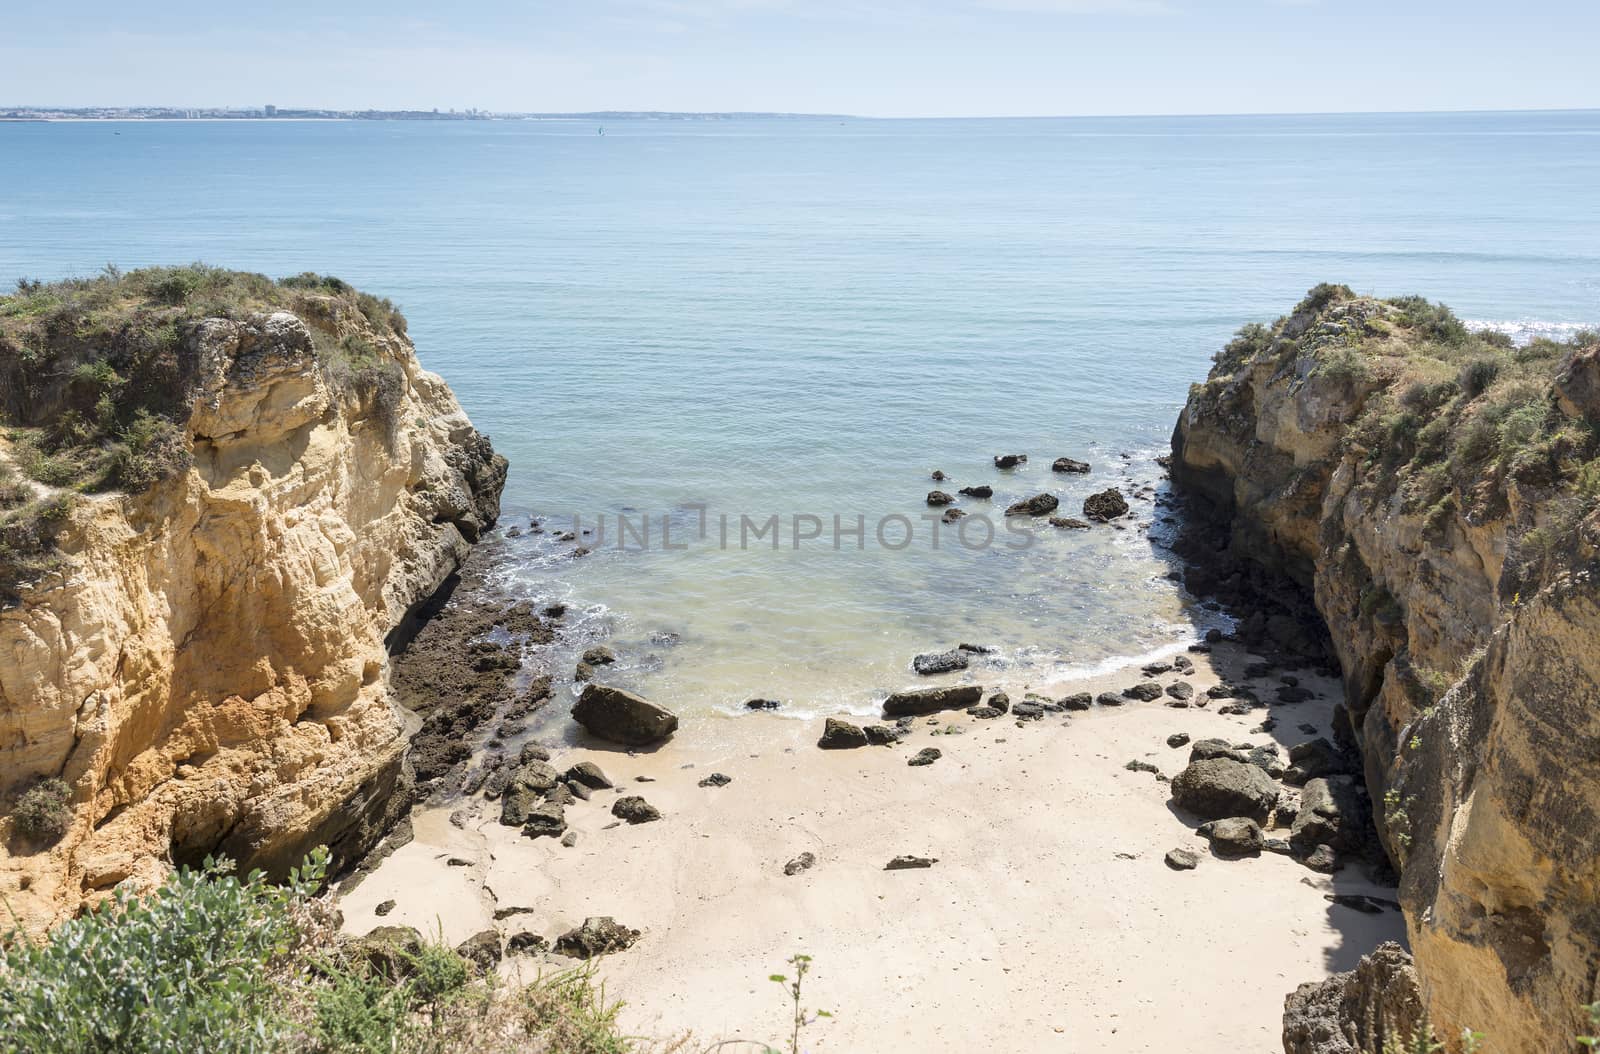 rocks and cliff in algarve city lagos in Portugal, the most beautifull coastline of the world